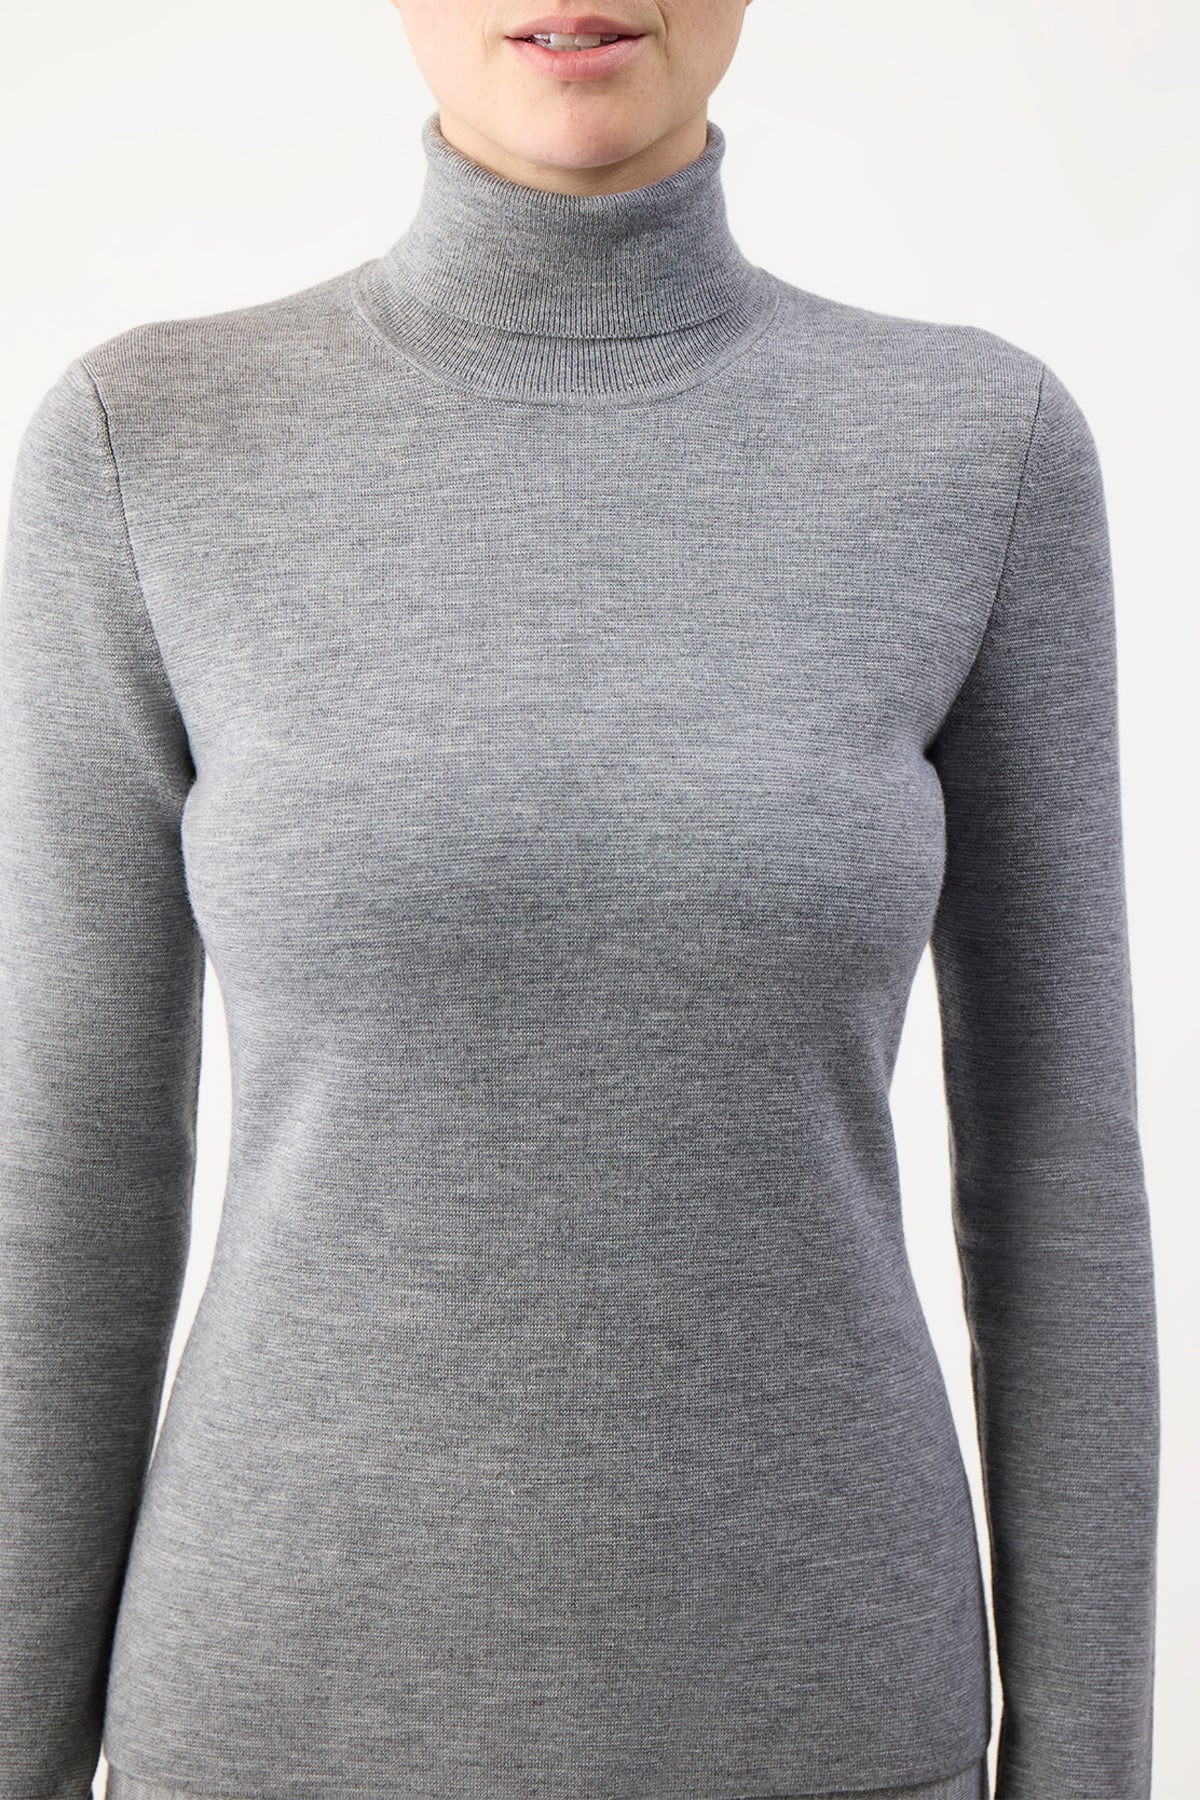 May Knit Turtleneck in Heather Grey Cashmere Wool